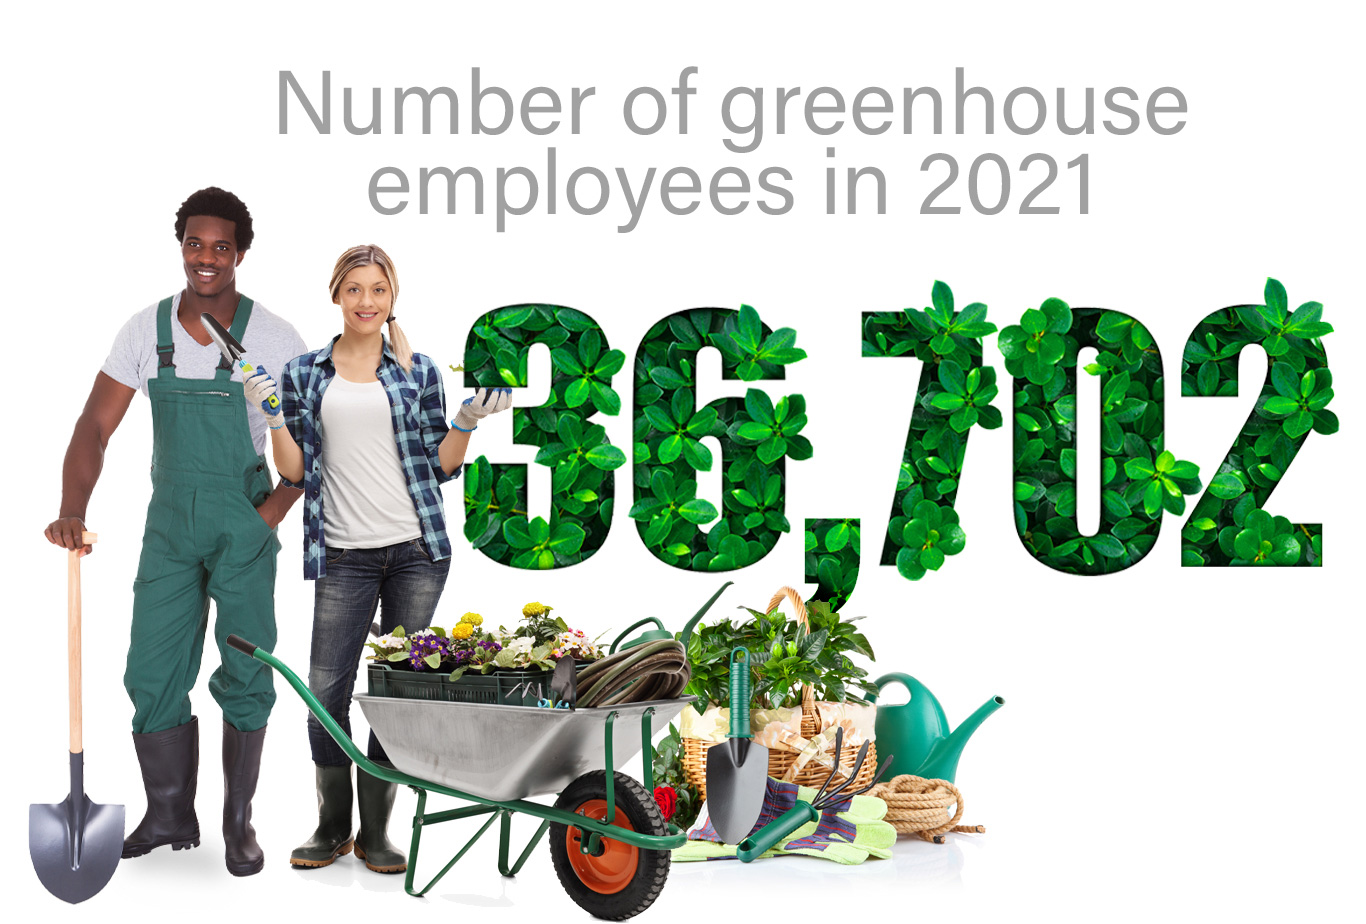 Two greenhouse employees with tools and plants with text "Number of greenhouse employees in 2021 36,702"